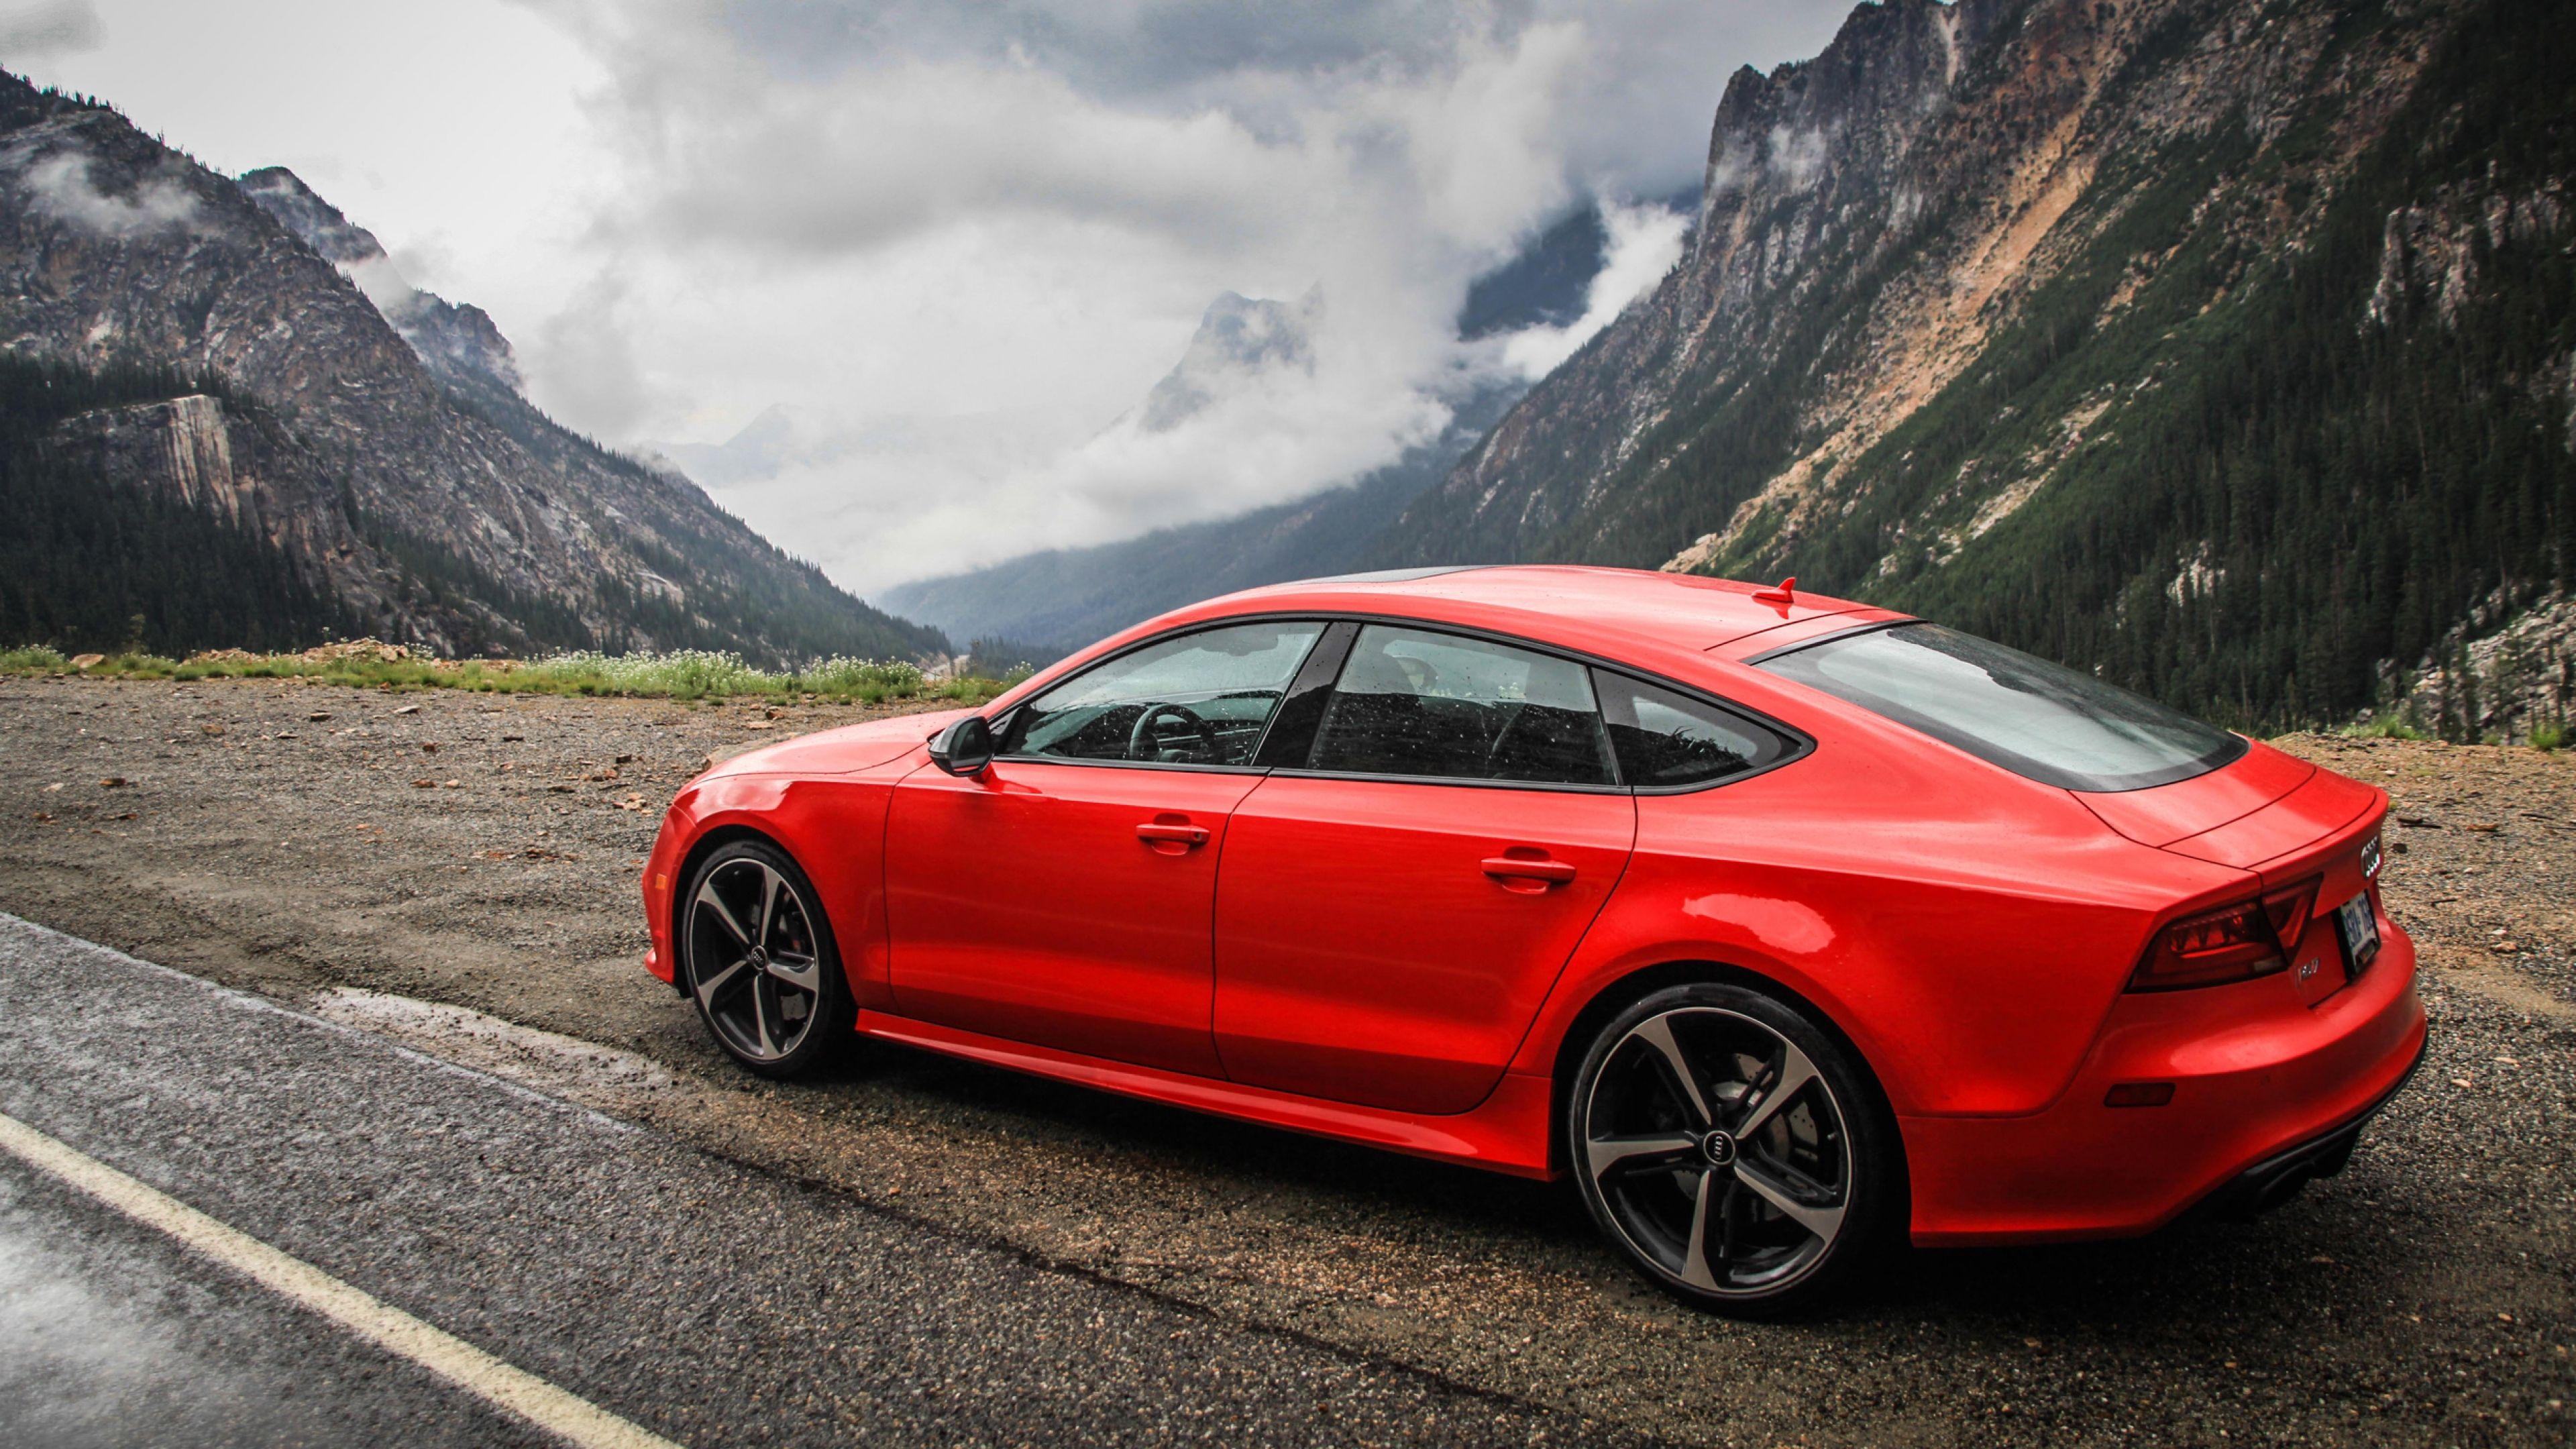 Audi Rs7 Wallpapers